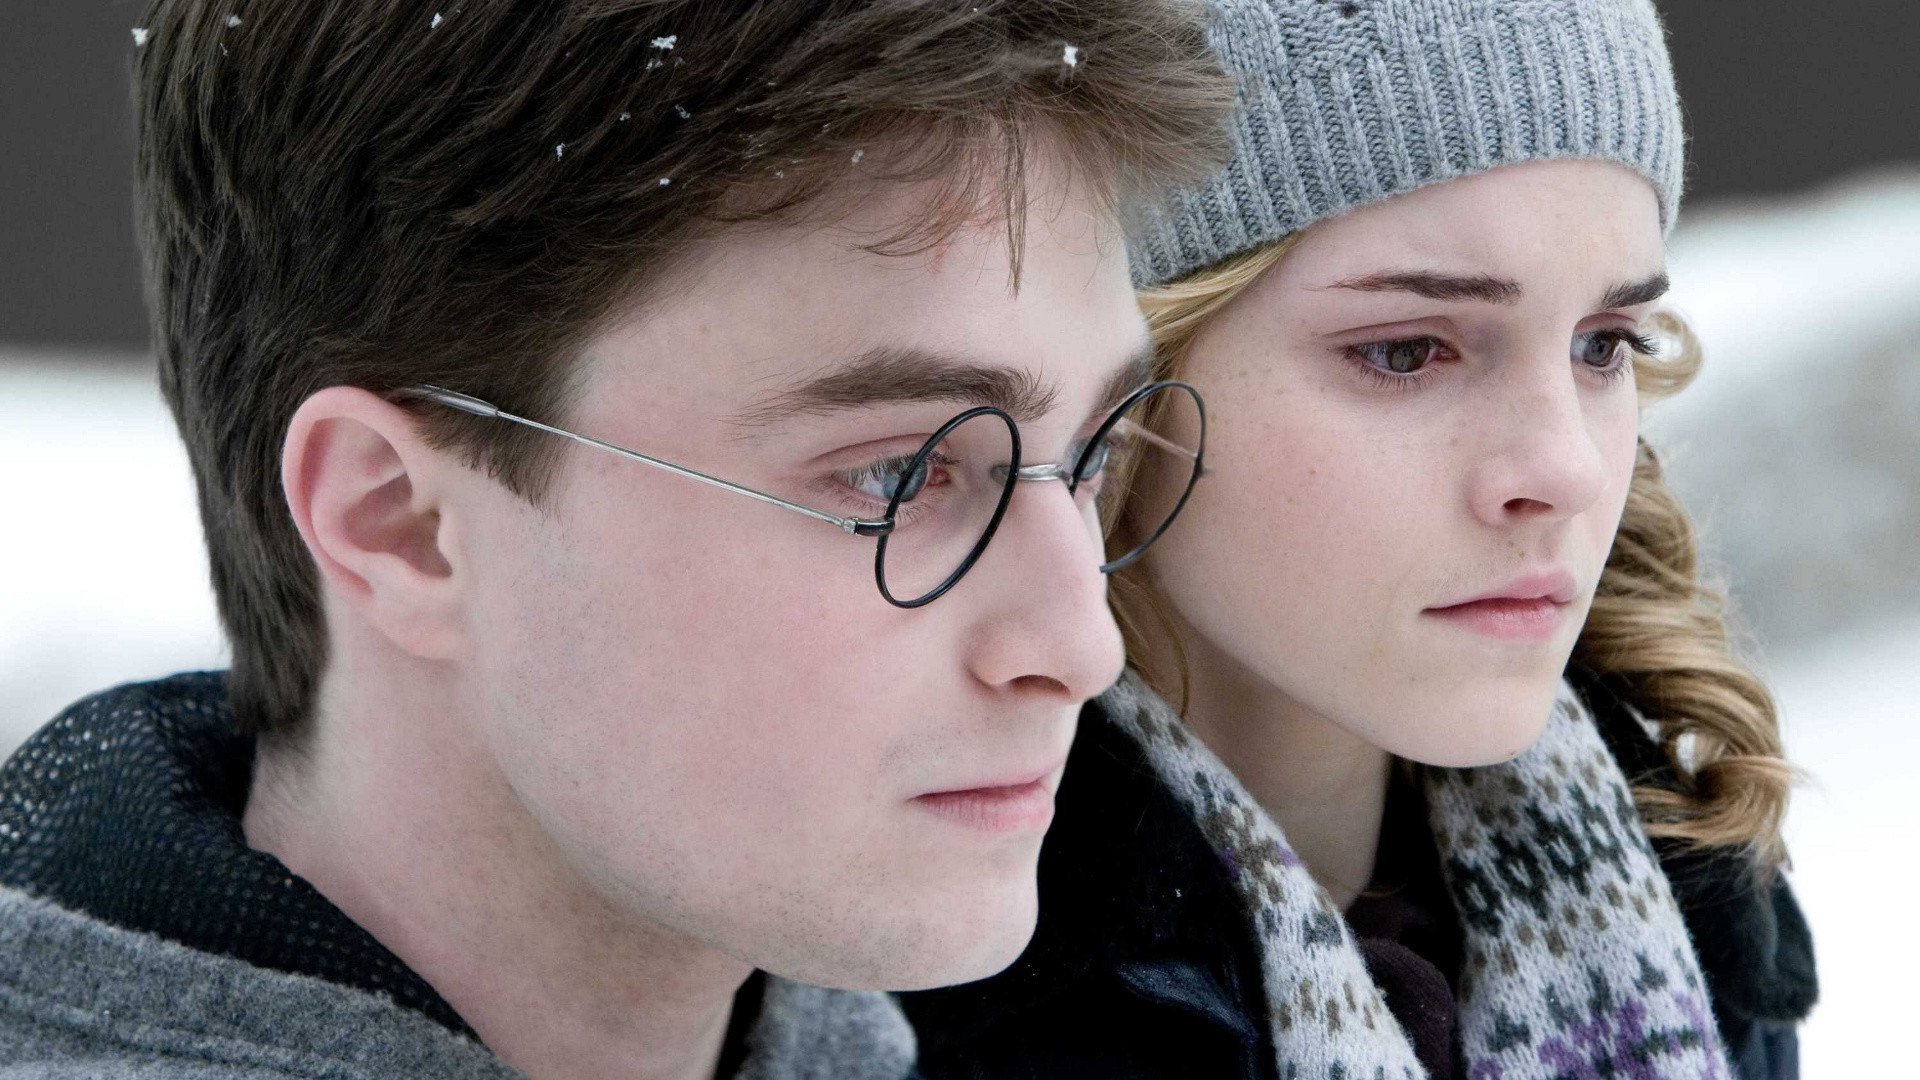 harry potter, movie, harry potter and the half blood prince, daniel radcliffe, emma watson, hermione granger for android